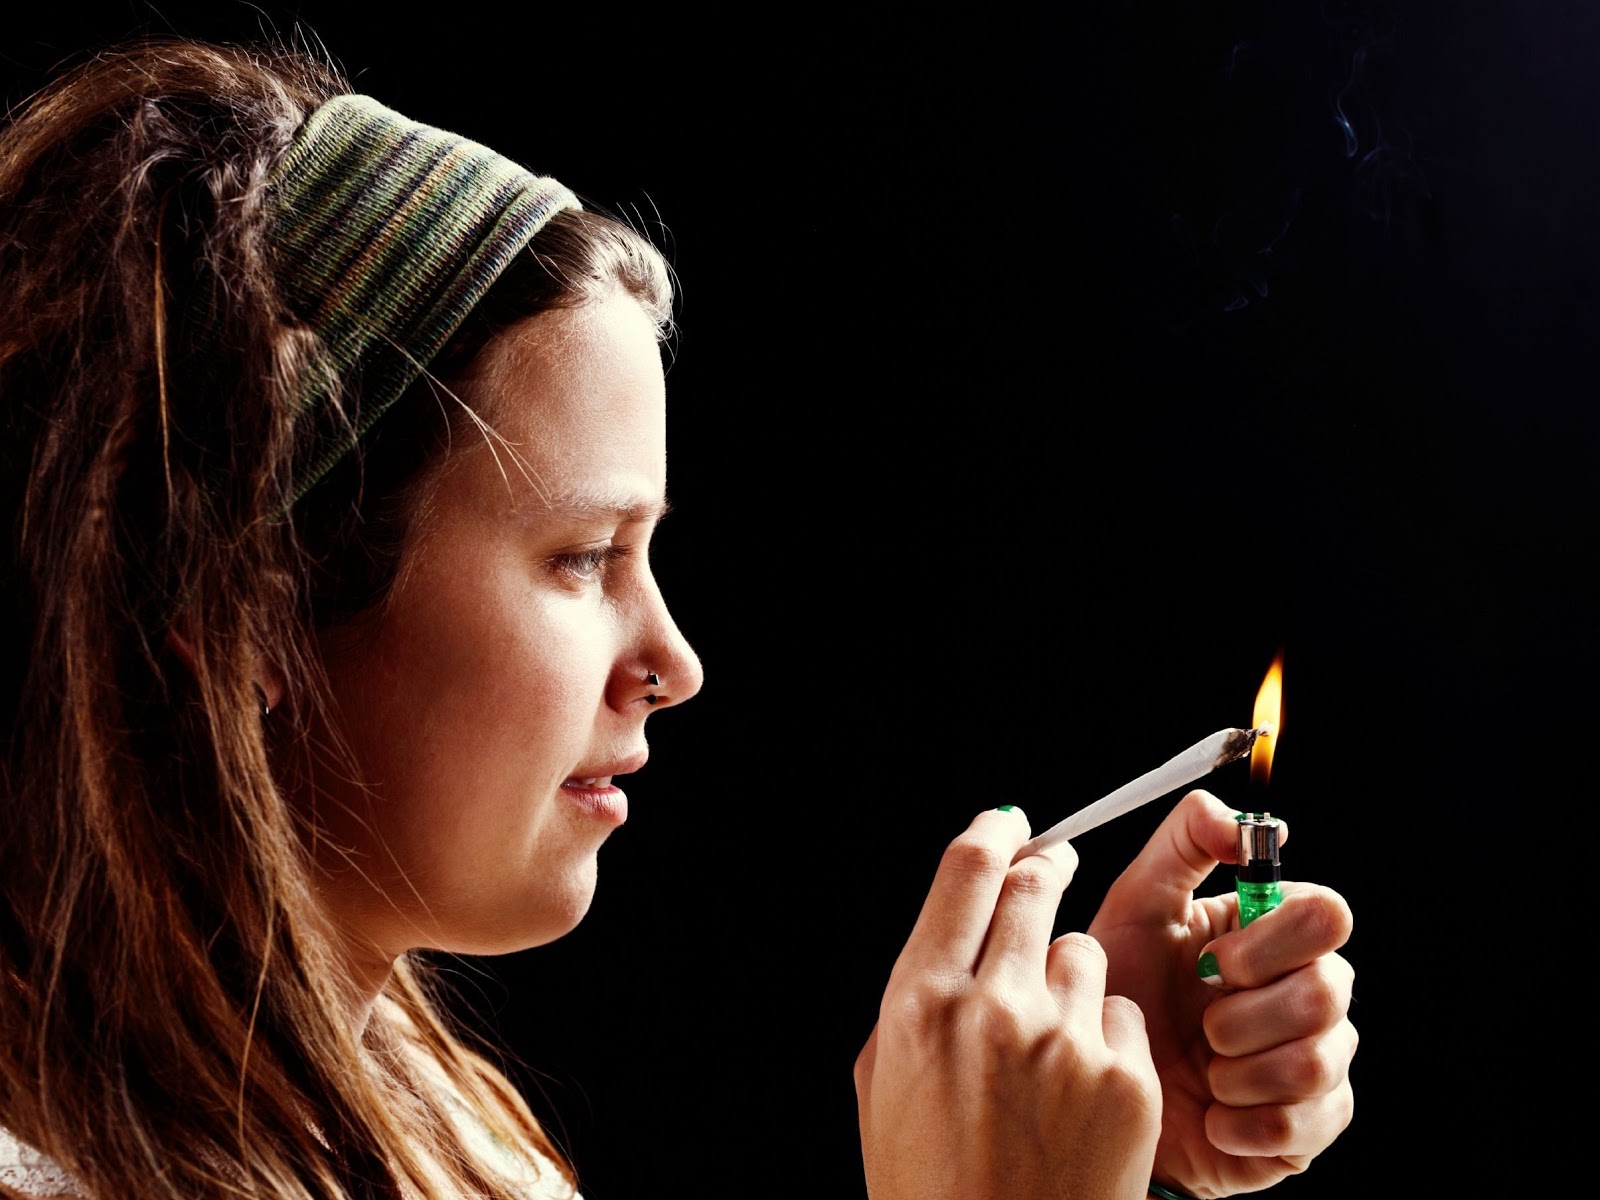 A woman suffering from cannabis addiction prepares to smoke weed due to withdrawal symptoms.